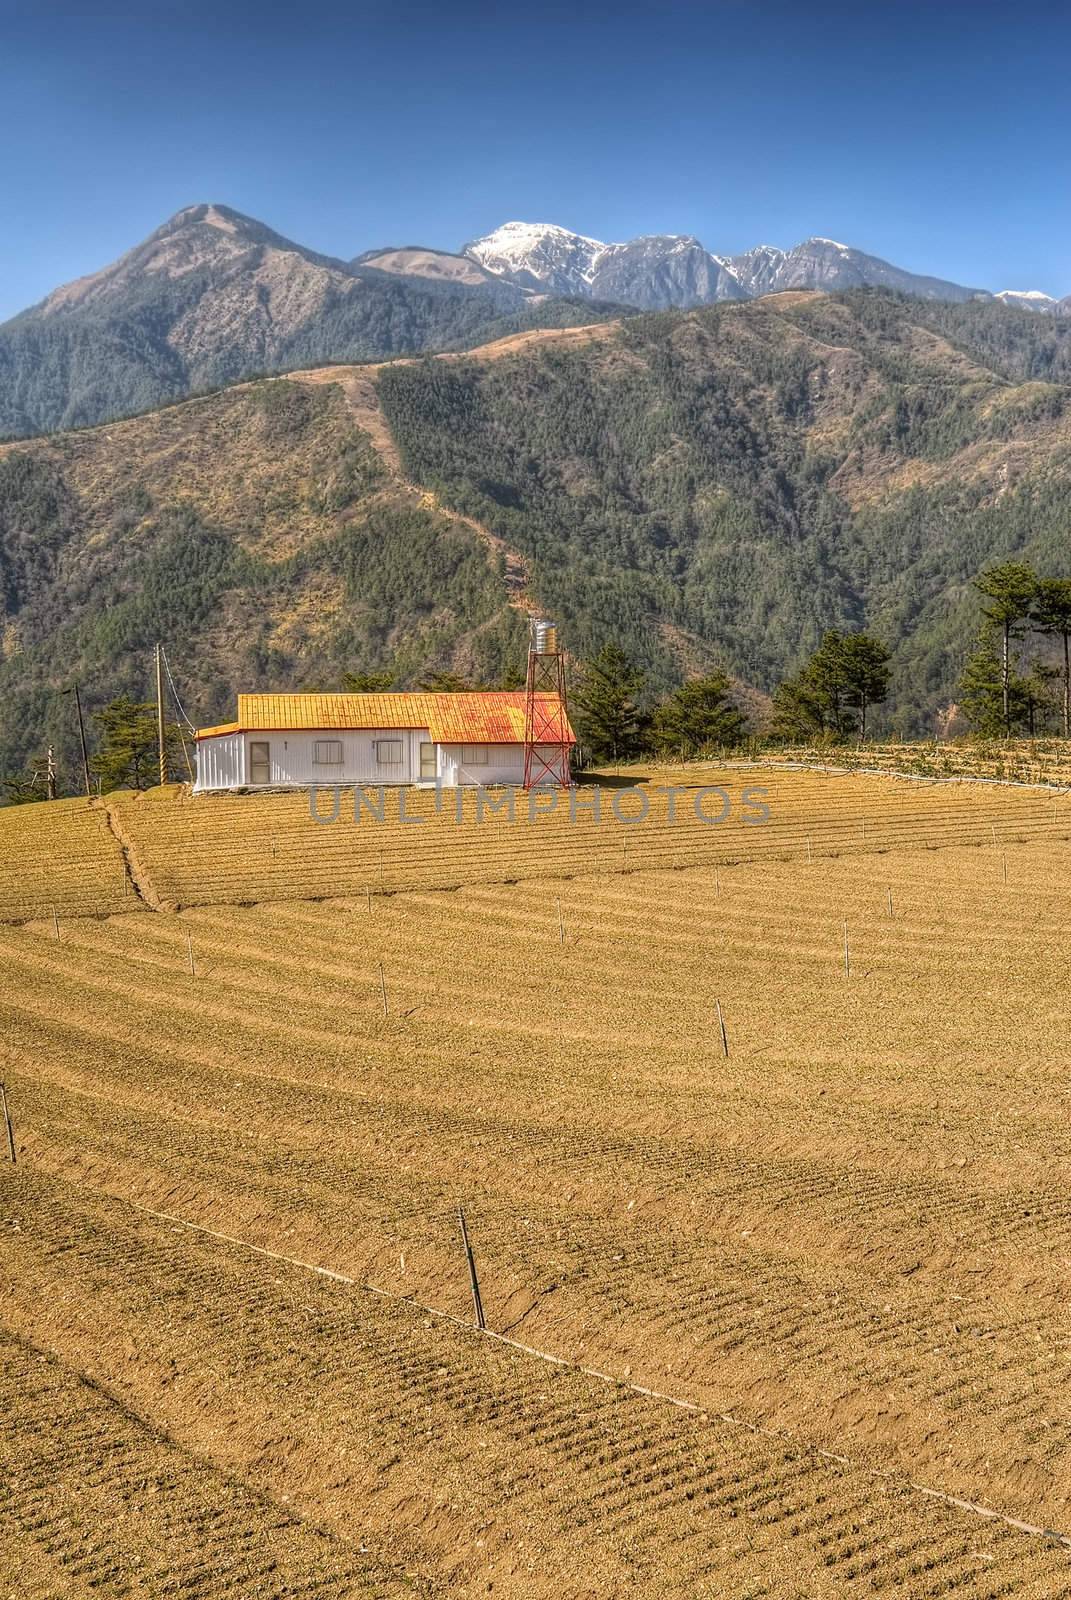 Rural scenery with empty farm in fall and snow mountain under blue sky in Taiwan, Asia.